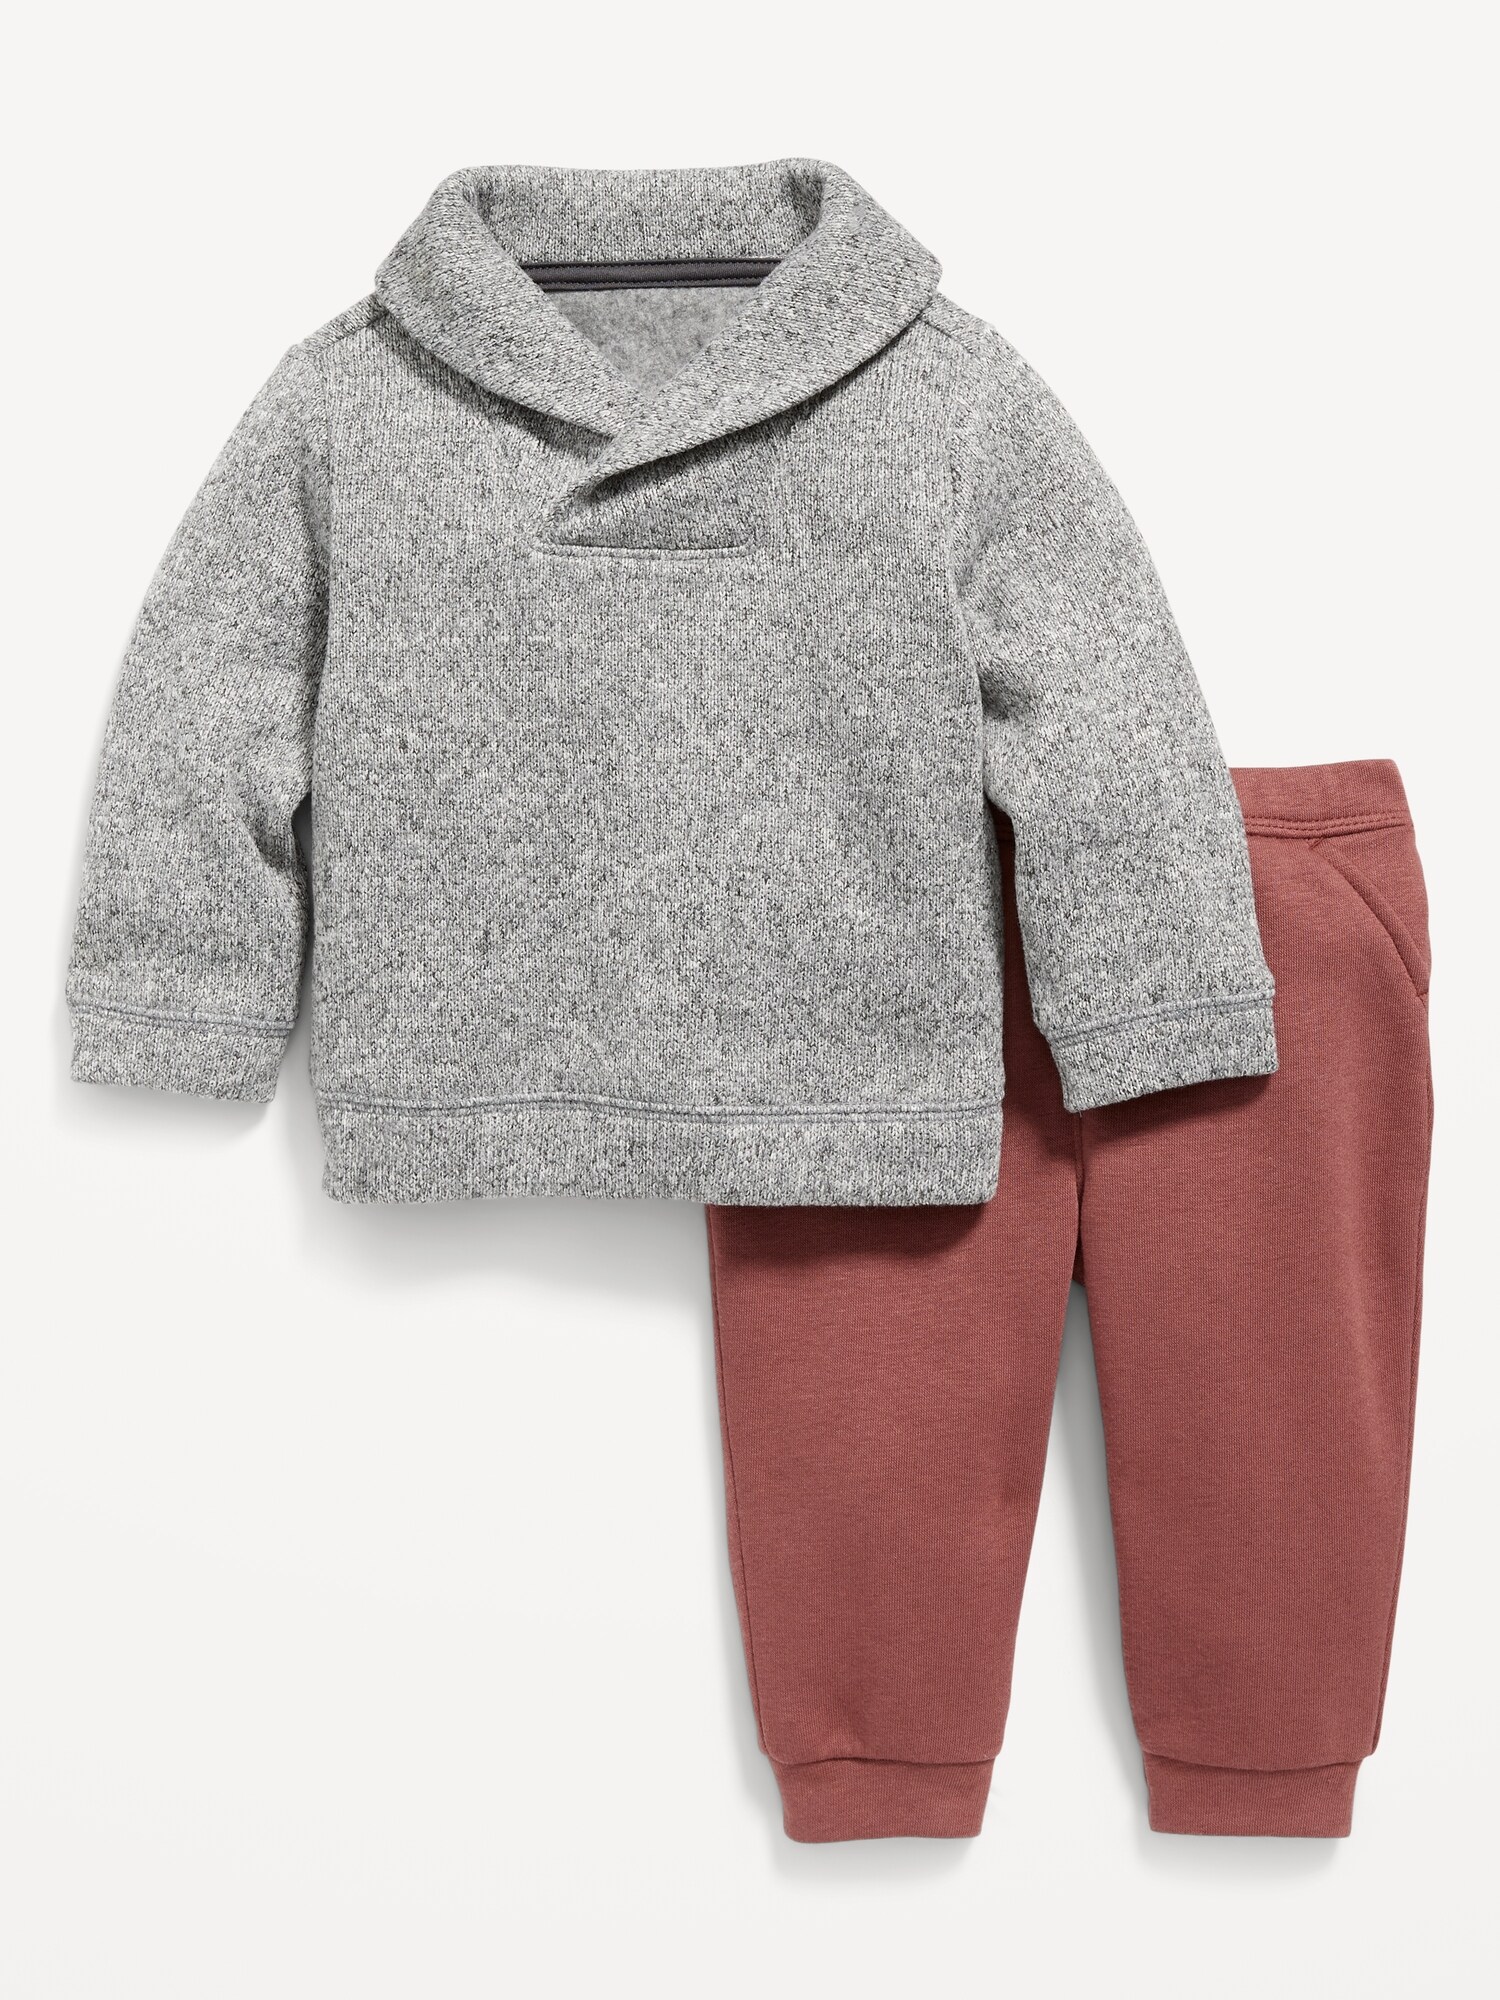 2-Piece Shawl-Collar Sweater and Jogger Sweatpants Set for Baby